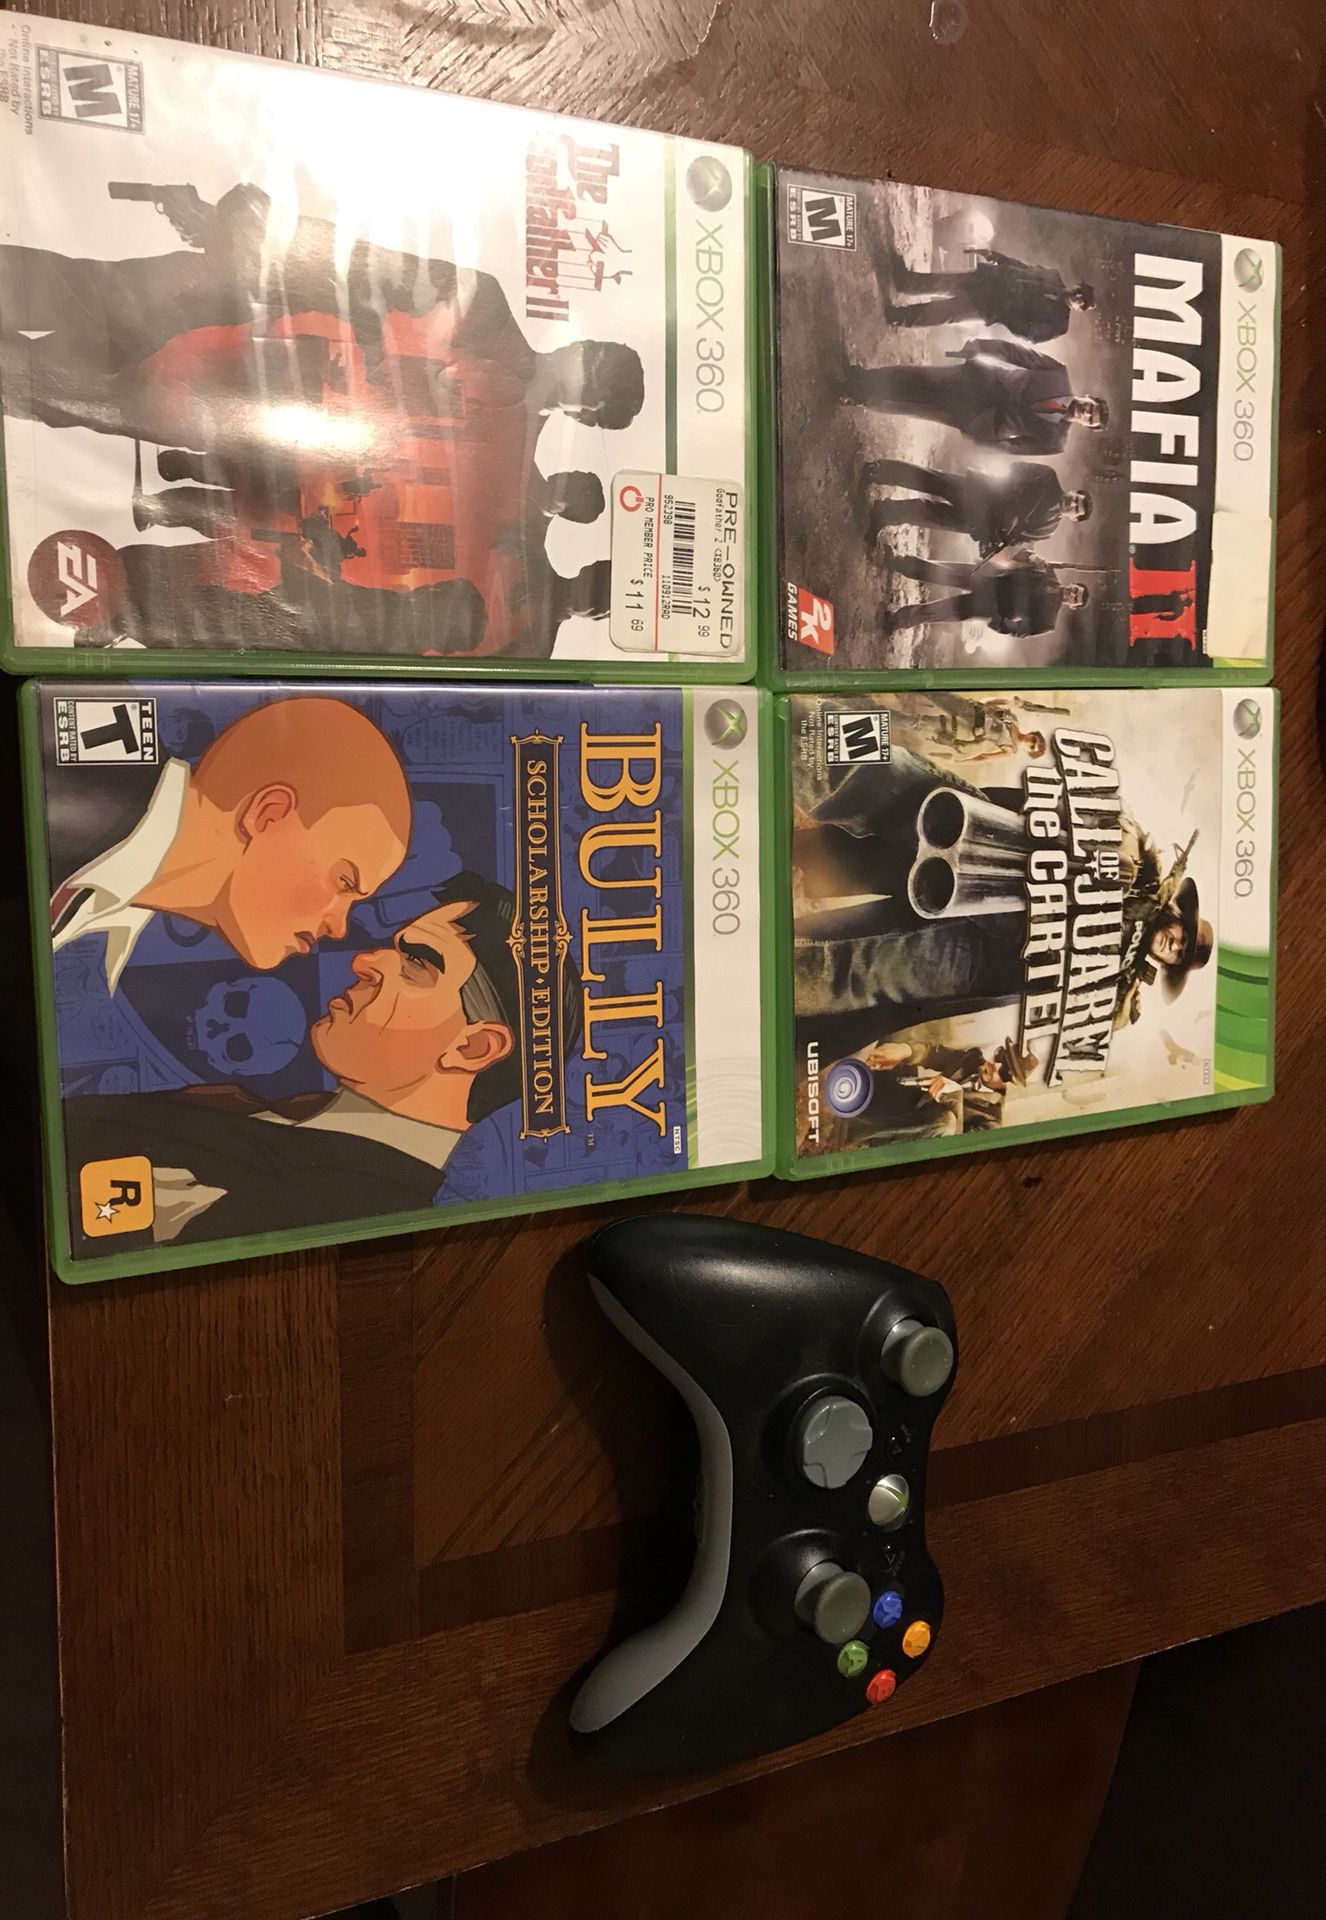 4. Xbox 360 games and 1 control